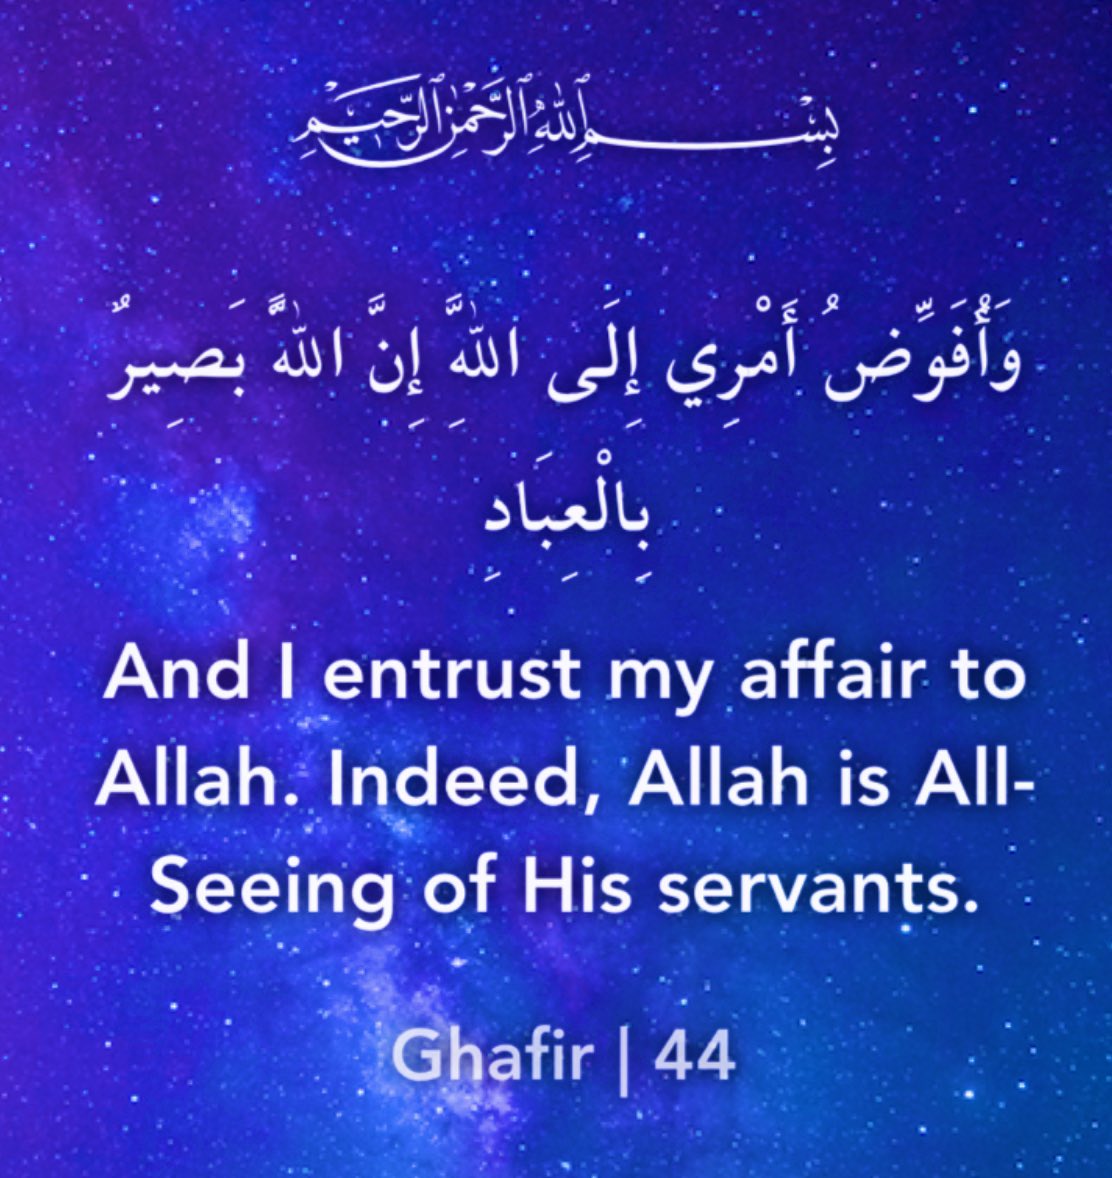 @muftimenk Keep your faith in the Almighty despite not seeing the result of your dua and prayers. Keep asking Him, you may be tested in these aspects in your life and need to have sabr to get what you want or what is better for you. Ask Him for patience and ease and say: